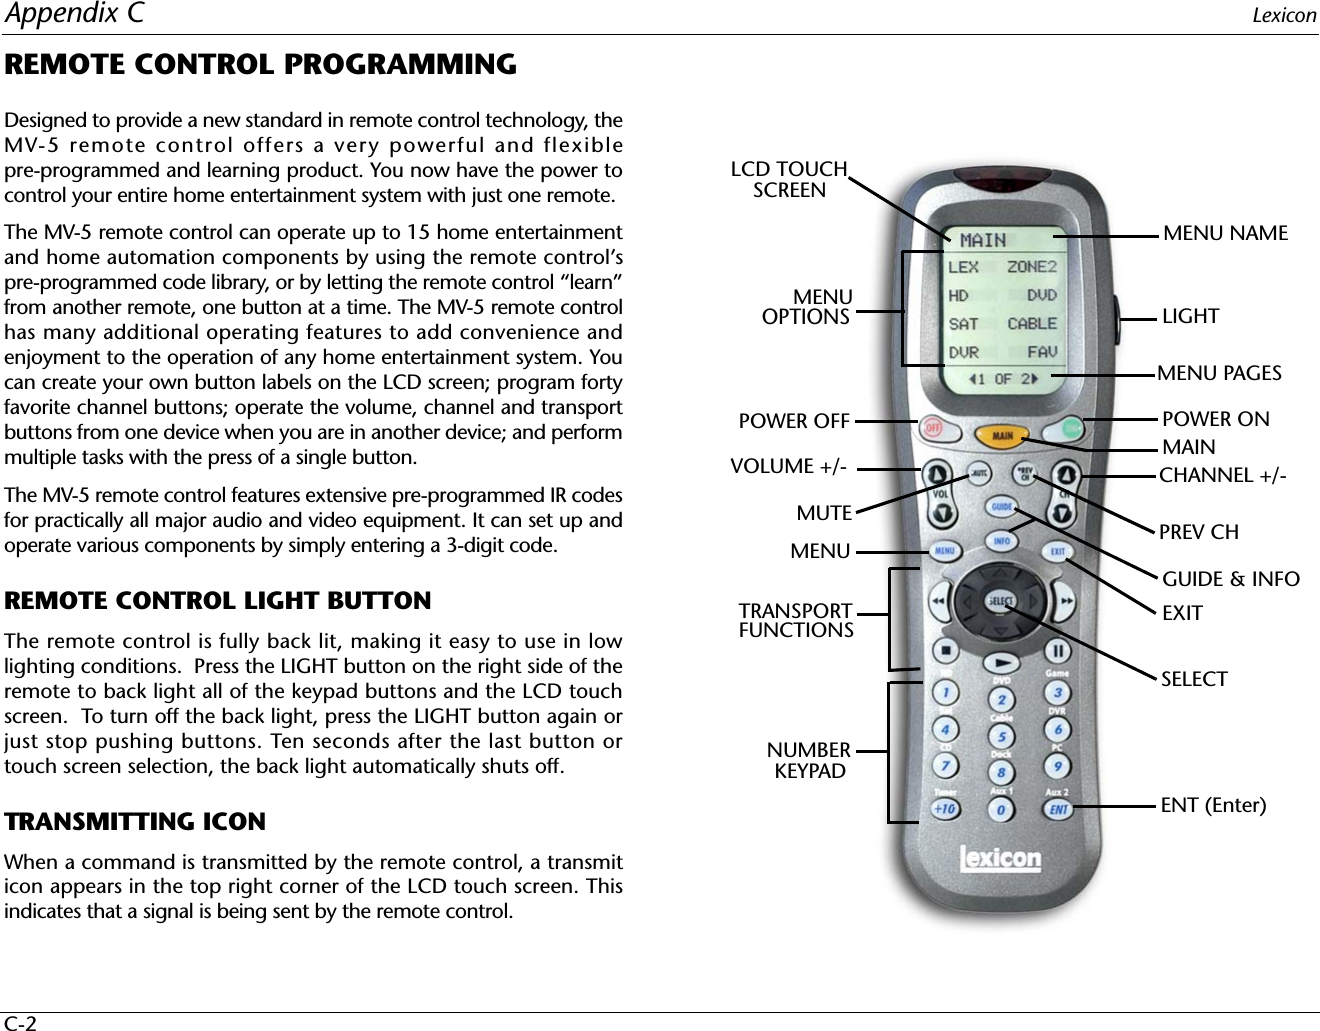 Appendix C LexiconC-2REMOTE CONTROL PROGRAMMINGDesigned to provide a new standard in remote control technology, theMV-5 remote control offers a very powerful and flexiblepre-programmed and learning product. You now have the power tocontrol your entire home entertainment system with just one remote.The MV-5 remote control can operate up to 15 home entertainmentand home automation components by using the remote control’spre-programmed code library, or by letting the remote control “learn”from another remote, one button at a time. The MV-5 remote controlhas many additional operating features to add convenience andenjoyment to the operation of any home entertainment system. Youcan create your own button labels on the LCD screen; program fortyfavorite channel buttons; operate the volume, channel and transportbuttons from one device when you are in another device; and performmultiple tasks with the press of a single button.The MV-5 remote control features extensive pre-programmed IR codesfor practically all major audio and video equipment. It can set up andoperate various components by simply entering a 3-digit code. REMOTE CONTROL LIGHT BUTTONThe remote control is fully back lit, making it easy to use in lowlighting conditions.  Press the LIGHT button on the right side of theremote to back light all of the keypad buttons and the LCD touchscreen.  To turn off the back light, press the LIGHT button again orjust stop pushing buttons. Ten seconds after the last button ortouch screen selection, the back light automatically shuts off.TRANSMITTING ICONWhen a command is transmitted by the remote control, a transmiticon appears in the top right corner of the LCD touch screen. Thisindicates that a signal is being sent by the remote control.ENT (Enter)LIGHTPOWER ONSELECTEXITCHANNEL +/-VOLUME +/-LCD TOUCHSCREENPOWER OFFMUTE PREV CHMENUTRANSPORTFUNCTIONSNUMBERKEYPADGUIDE &amp; INFOMAINMENU NAMEMENU PAGESMENU OPTIONS